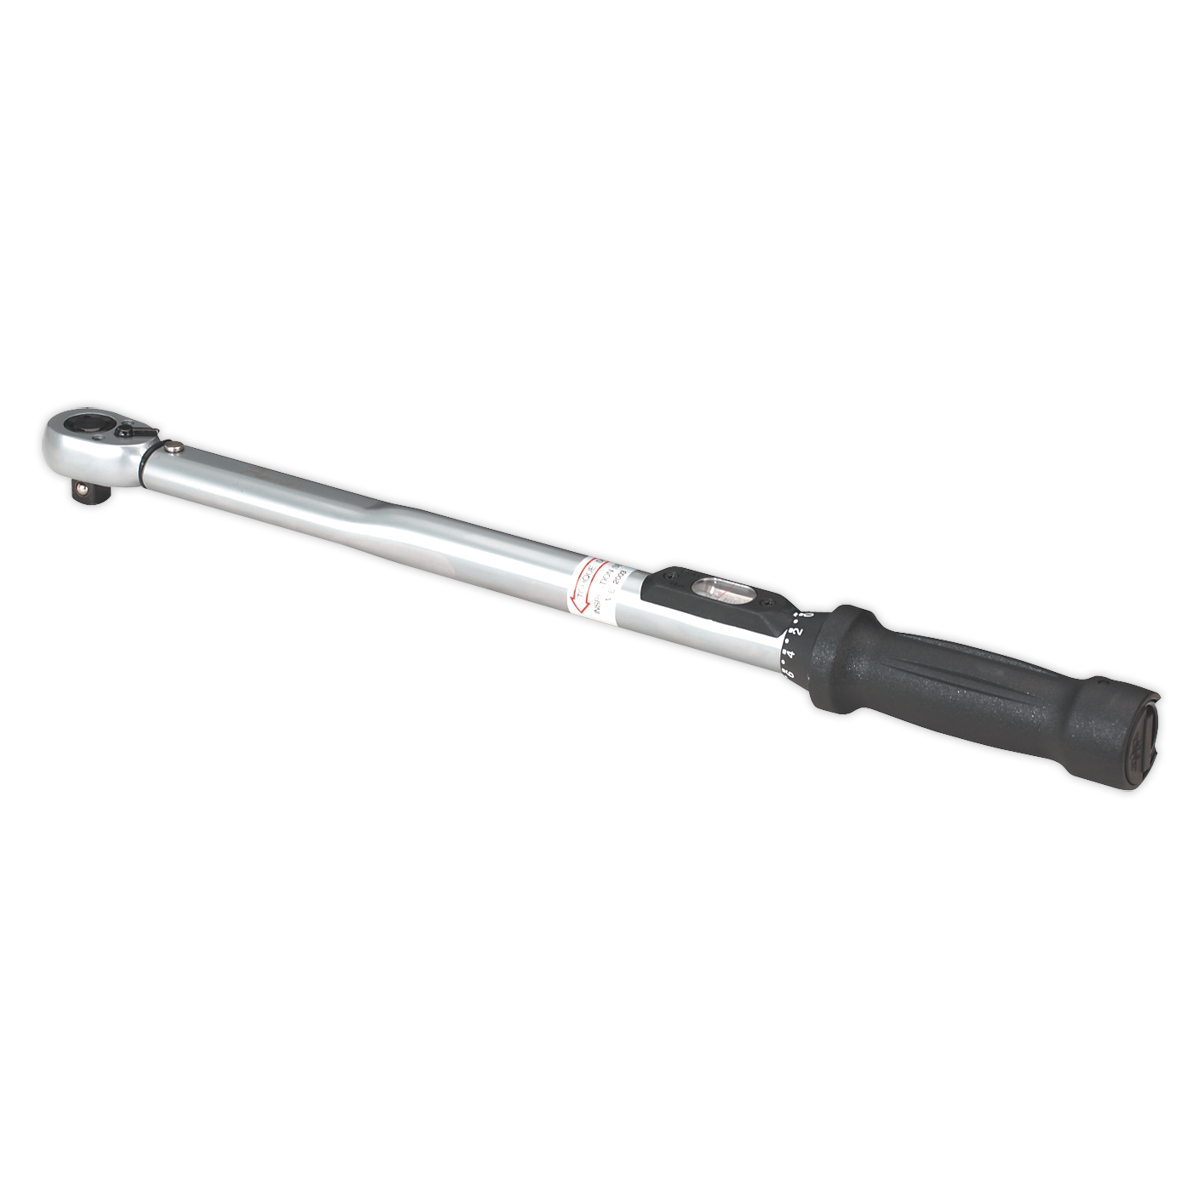 Torque Wrench Locking Micrometer Style 1/2"Sq Drive 40-210Nm(30-150lb.ft) Calibrated - STW201 - Farming Parts